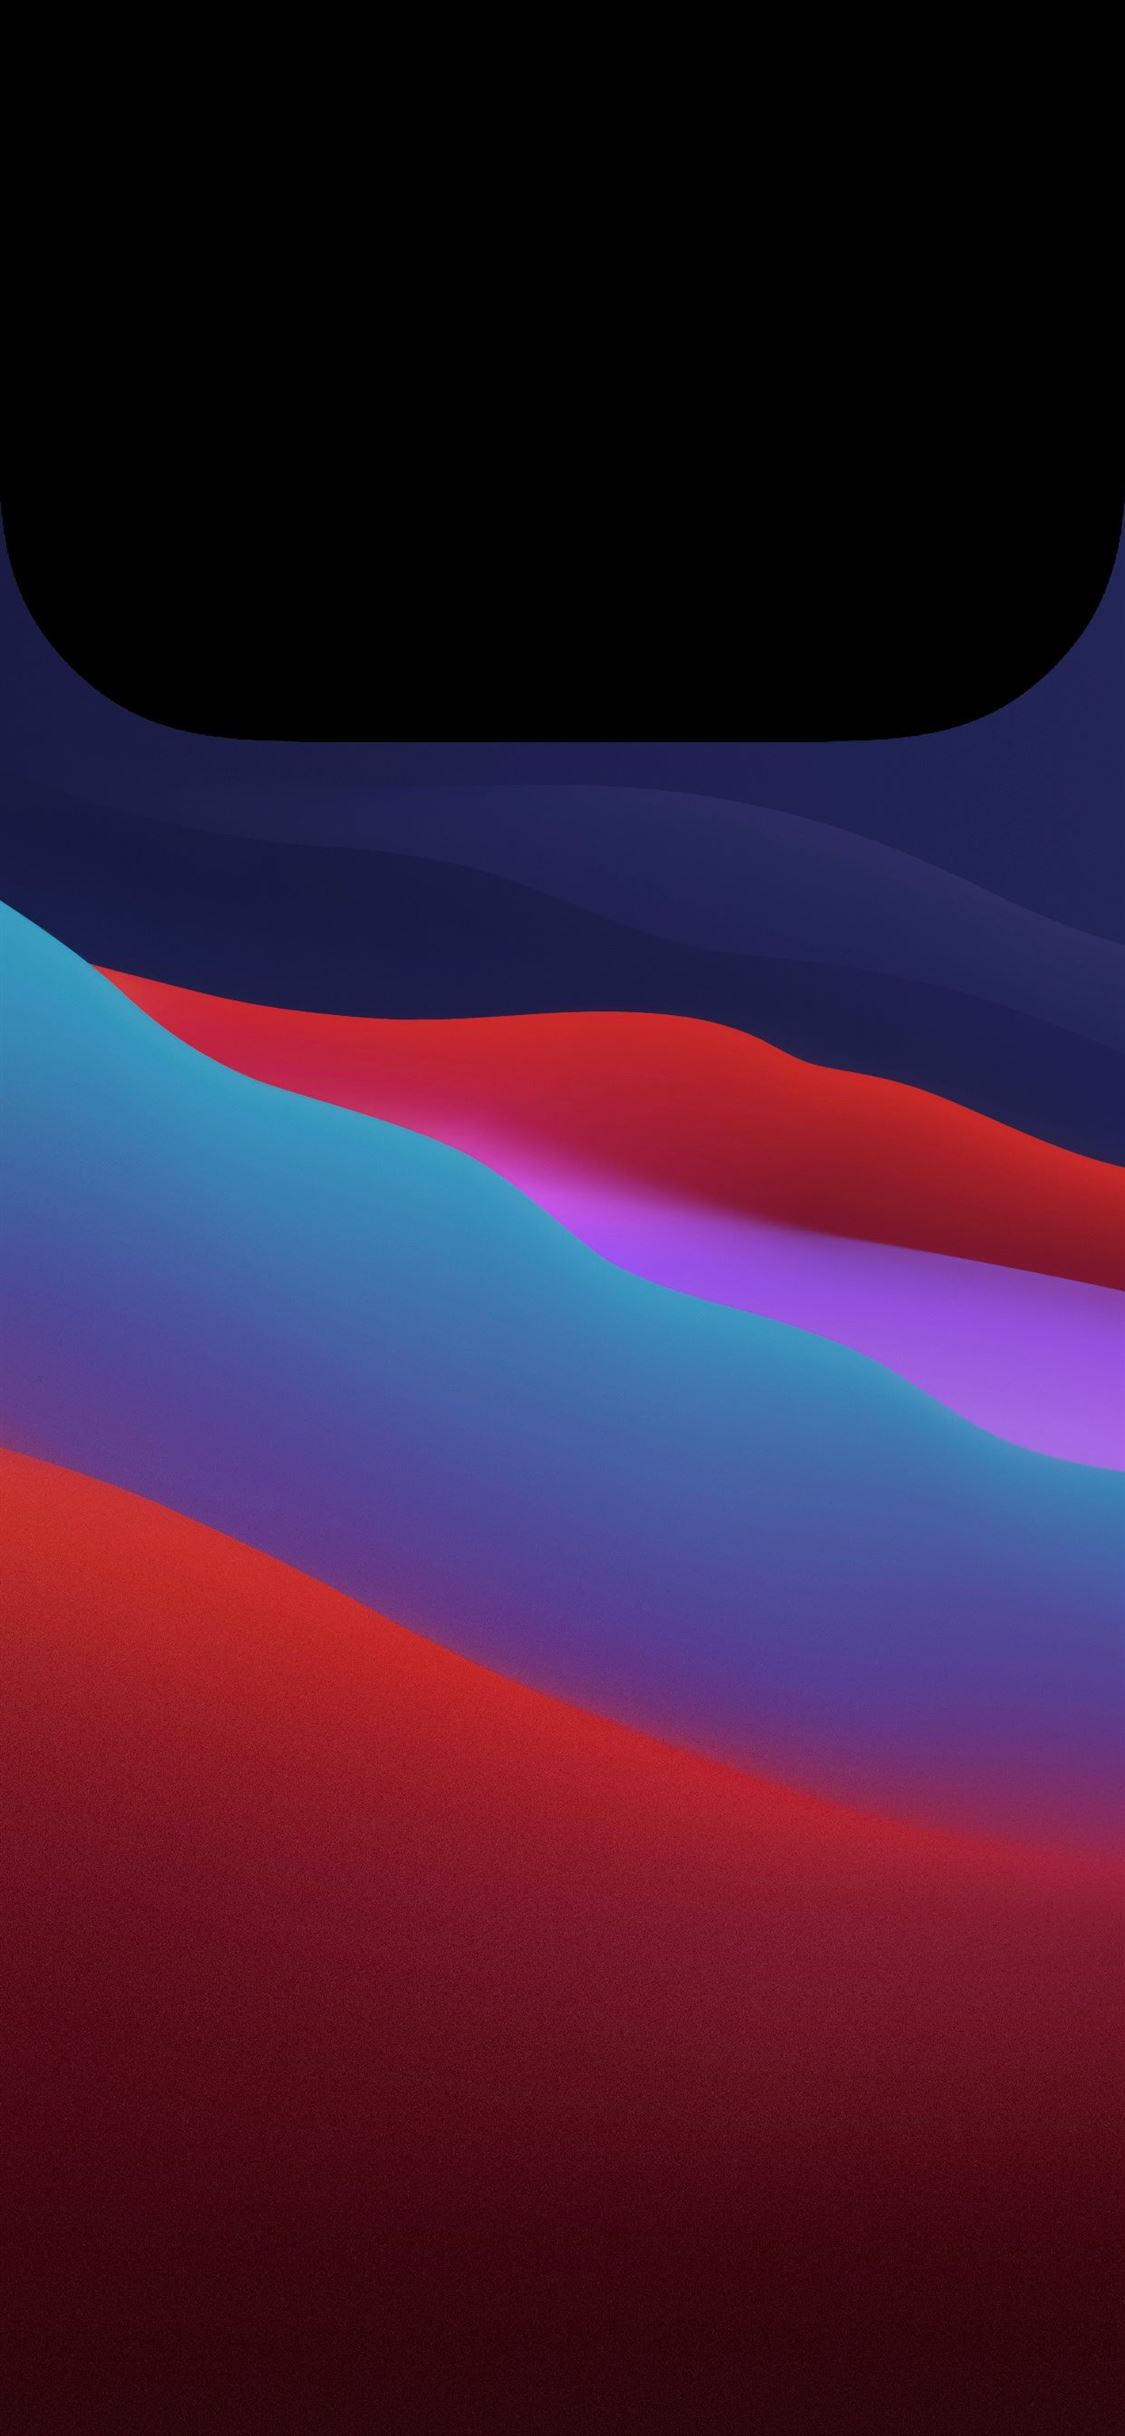 Aesthetic Iphone Xr Wallpapers